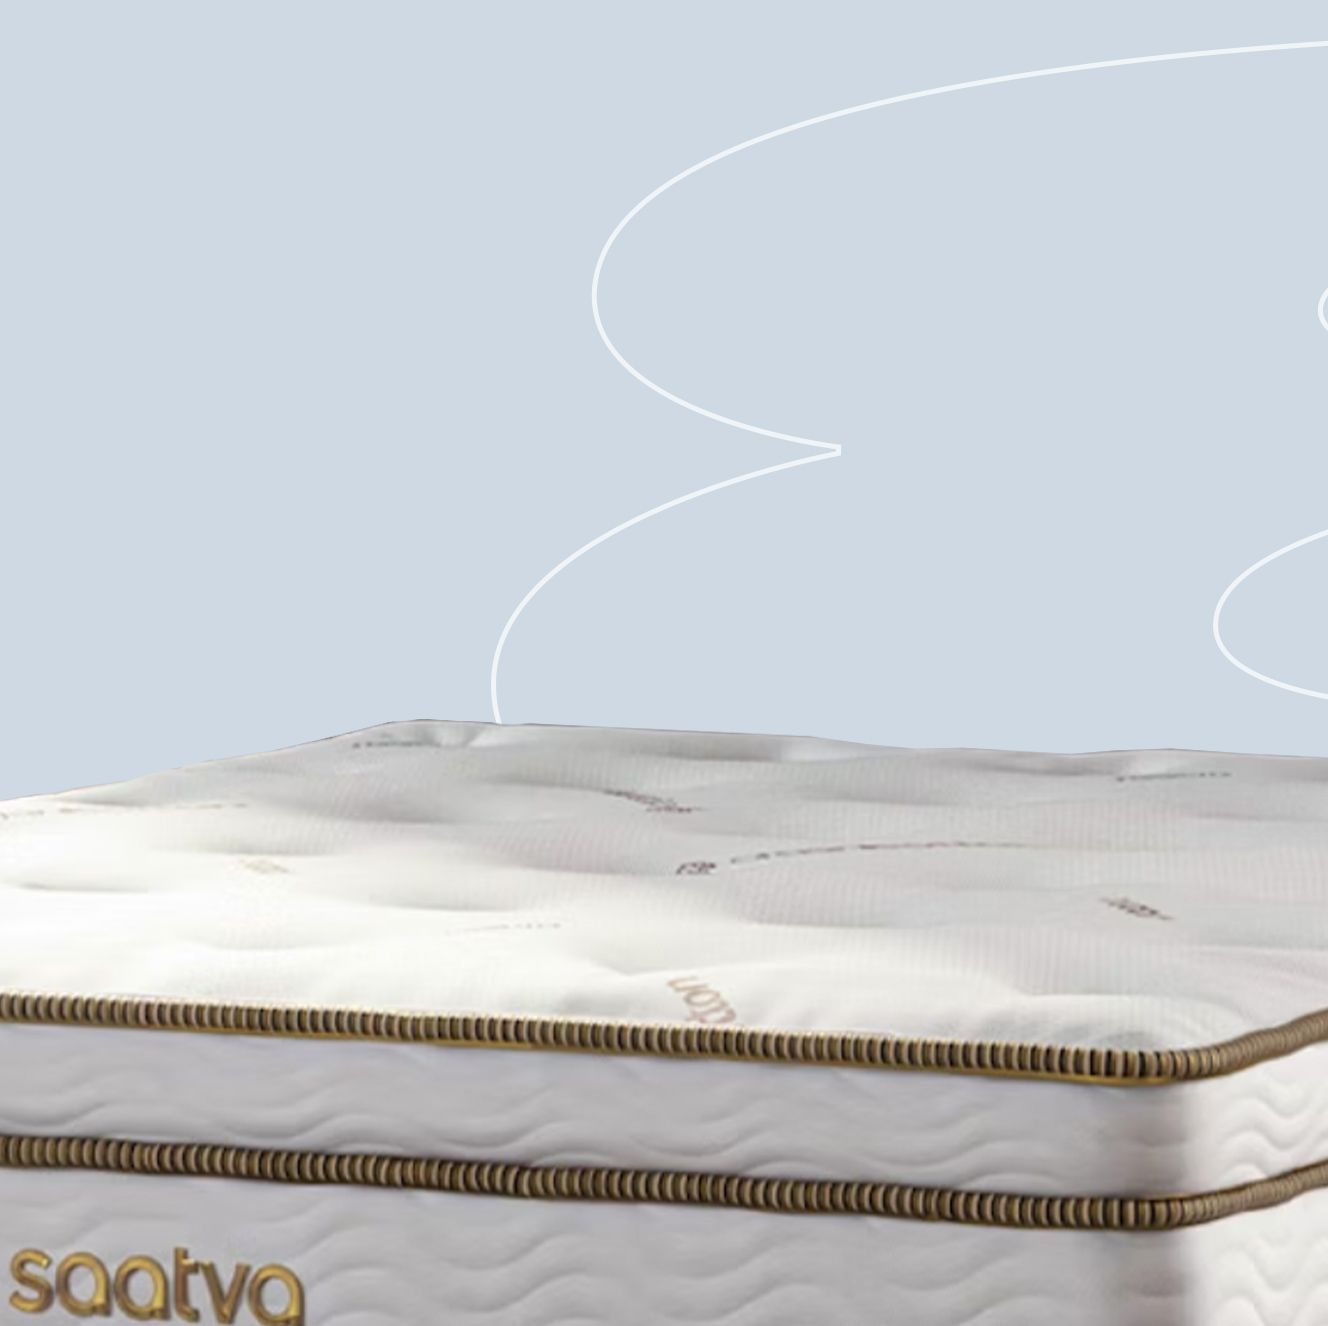 Saatva's Best Mattresses Are All on Sale Right Now